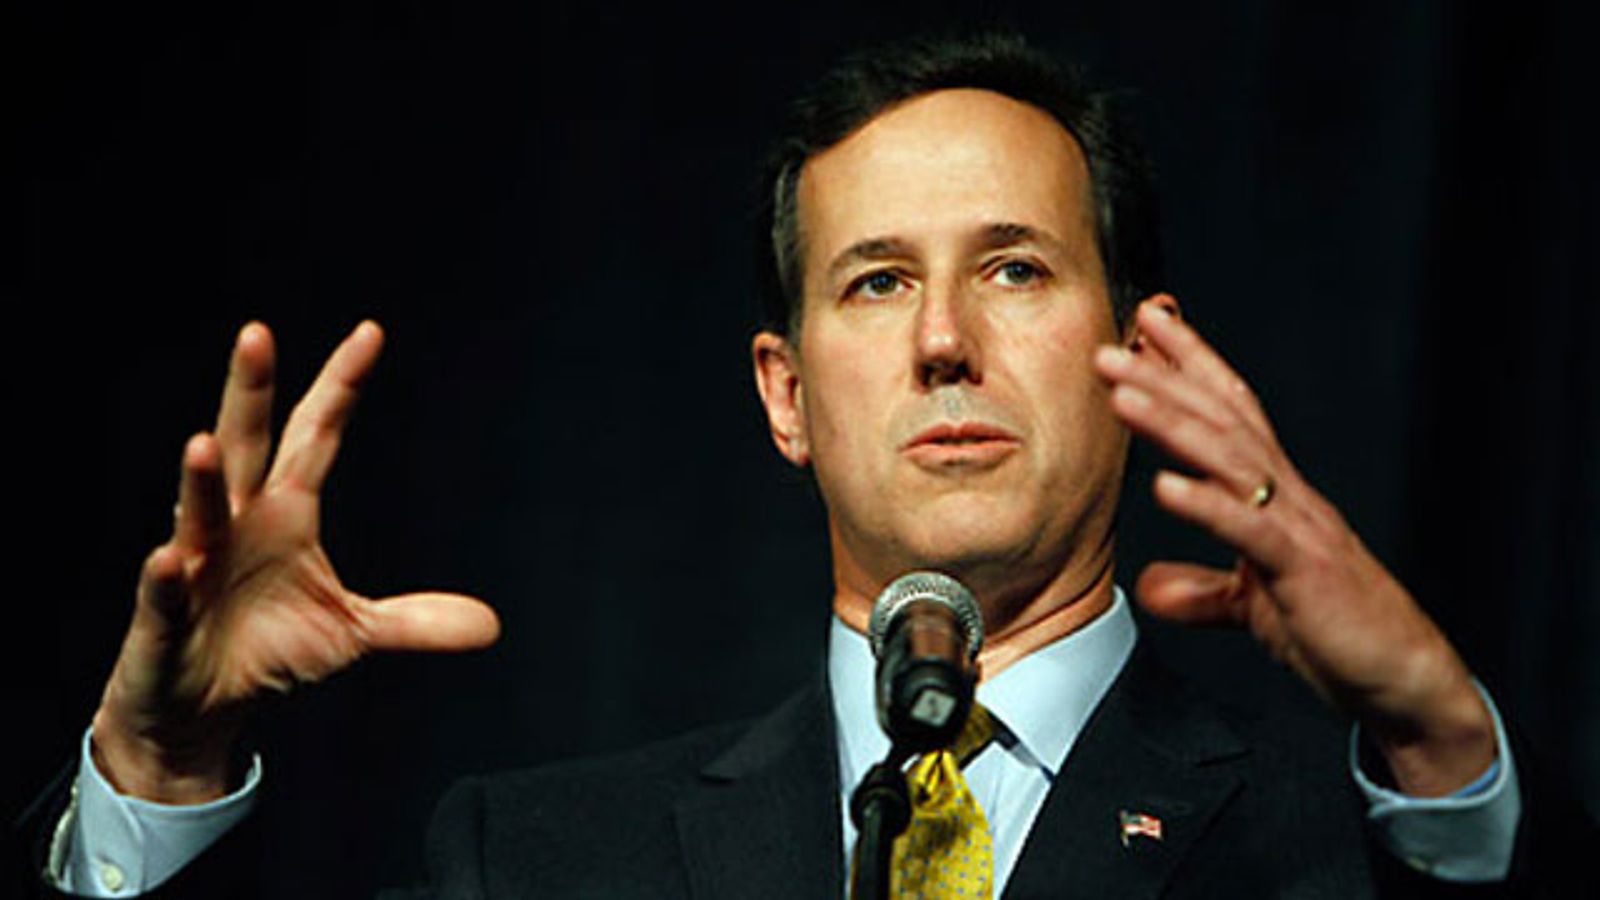 Mainstream Takes Notice of Santorum's Call for a War on Porn